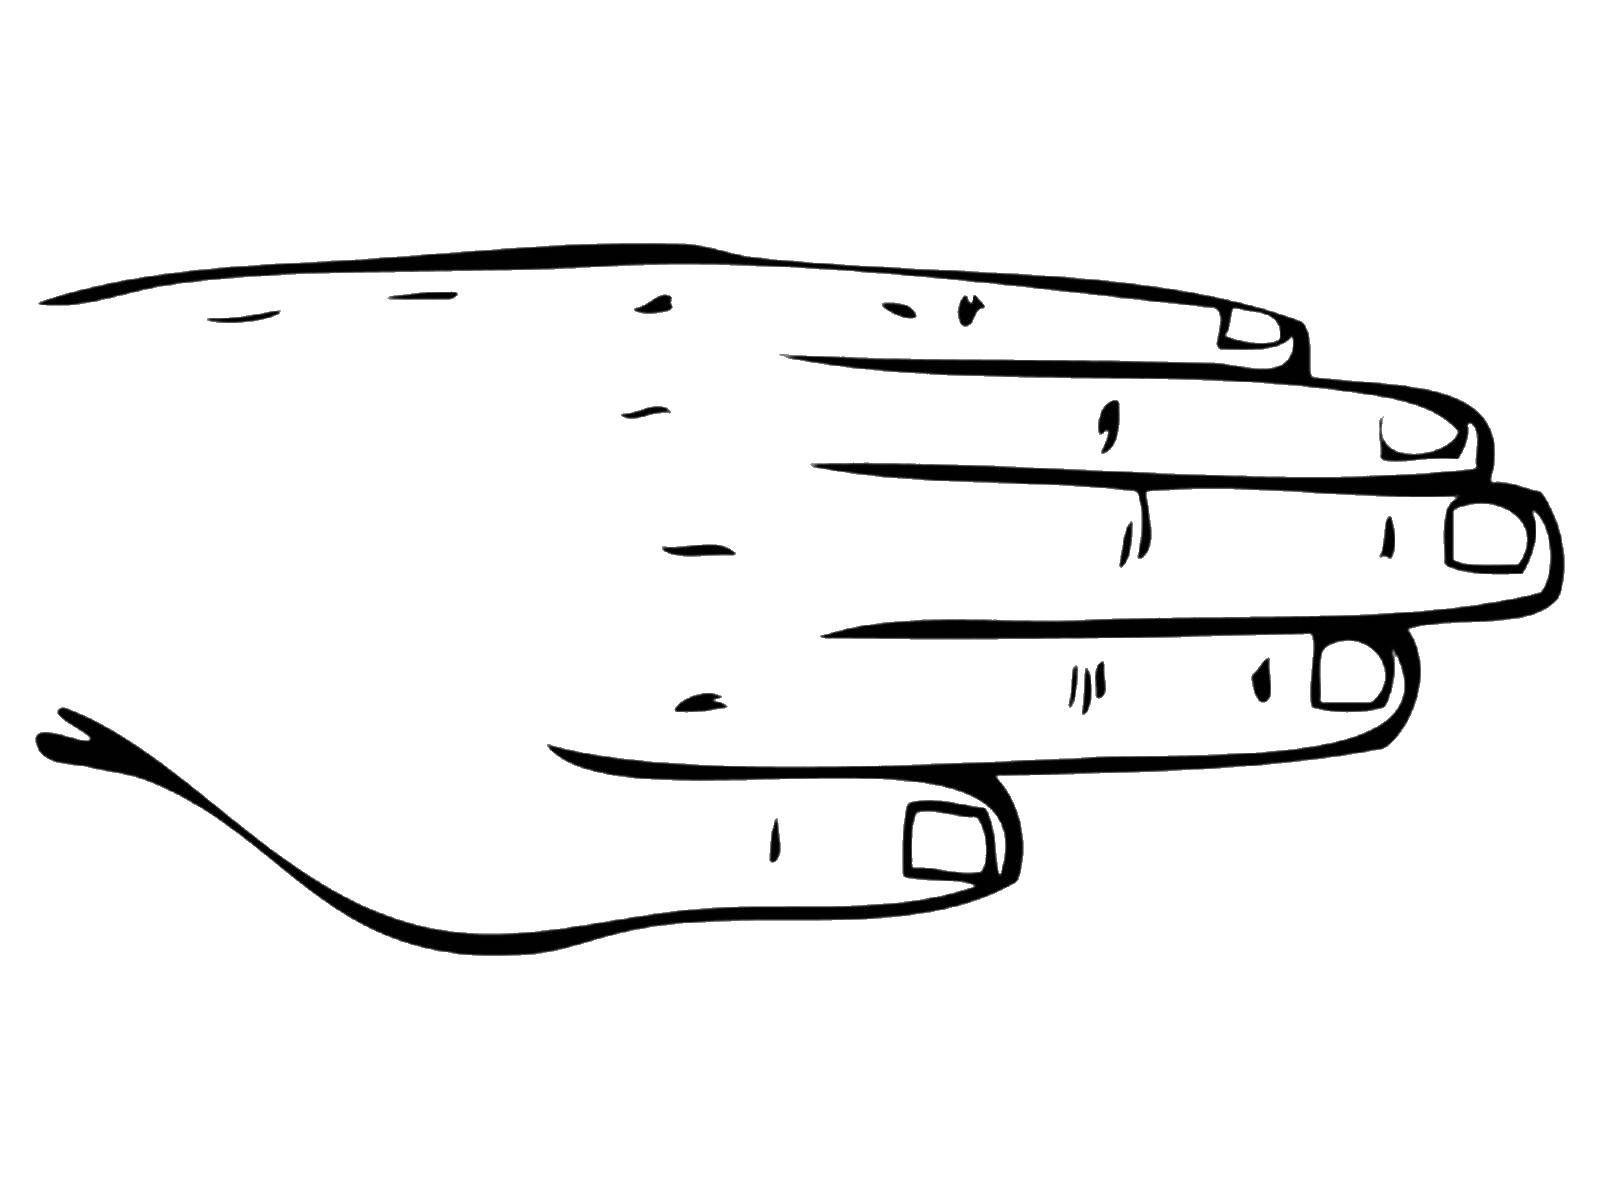 Coloring The hand. Category The structure of the body. Tags:  Hand, brush.